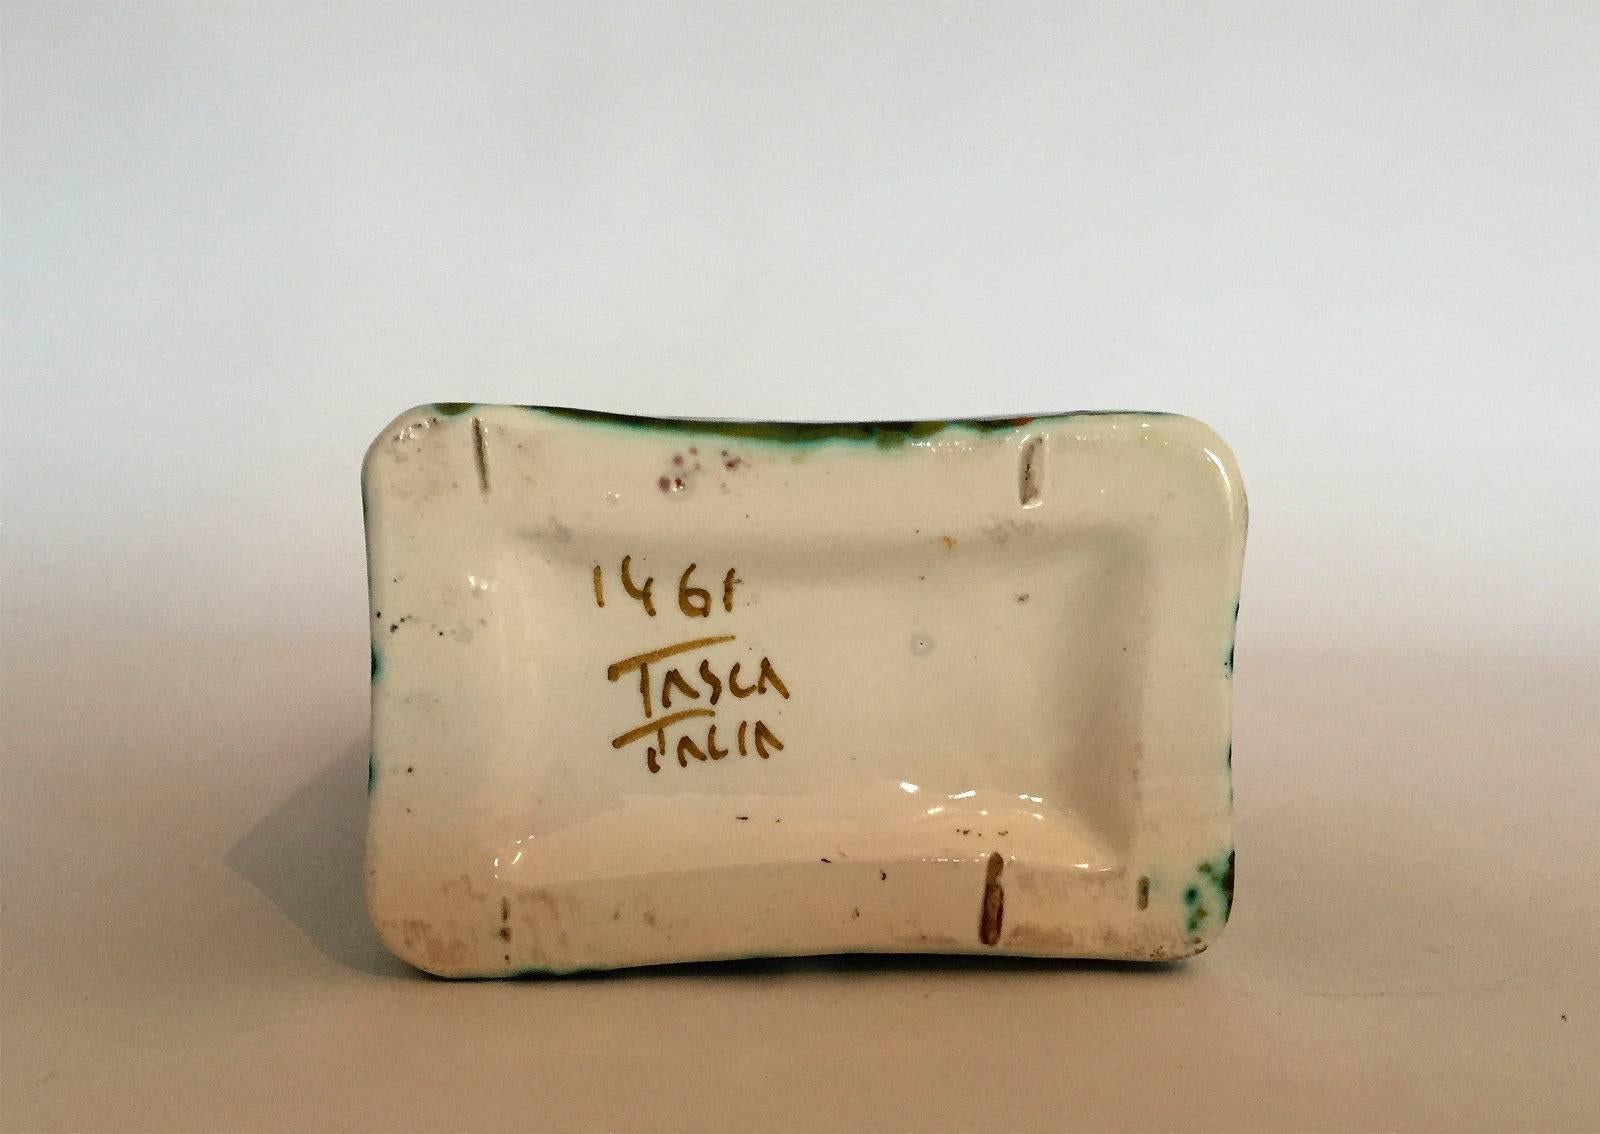 Alessio Tasca Raymor Ceramic Vase Signed, Italy, 1960s. Decorated with fish on one side and birds on the other. Signed on bottom of vase: 1461 Tasca Italia.